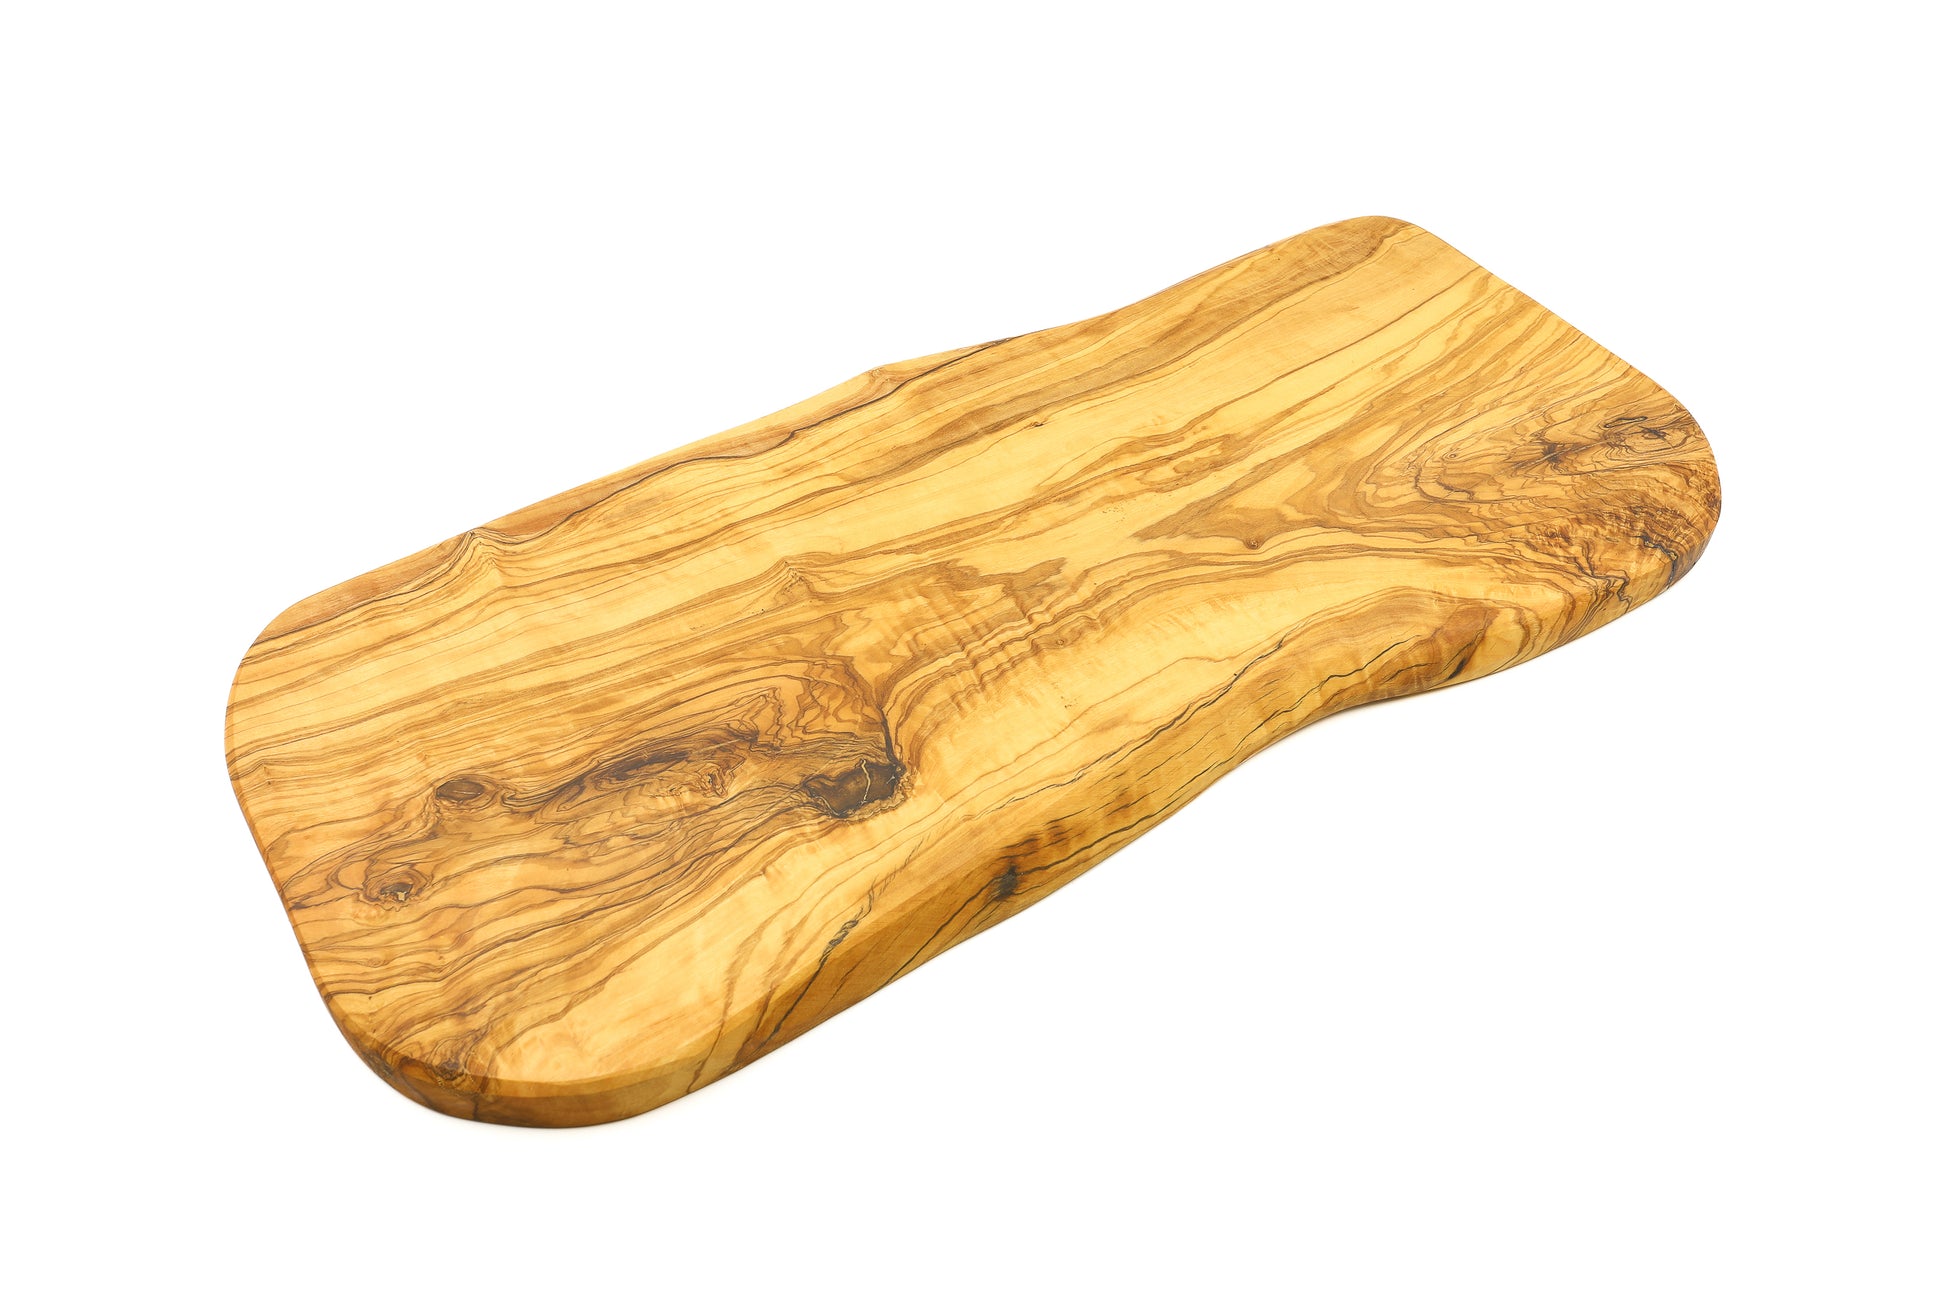 Premium olive wood board, oversized and perfect for kitchen tasks